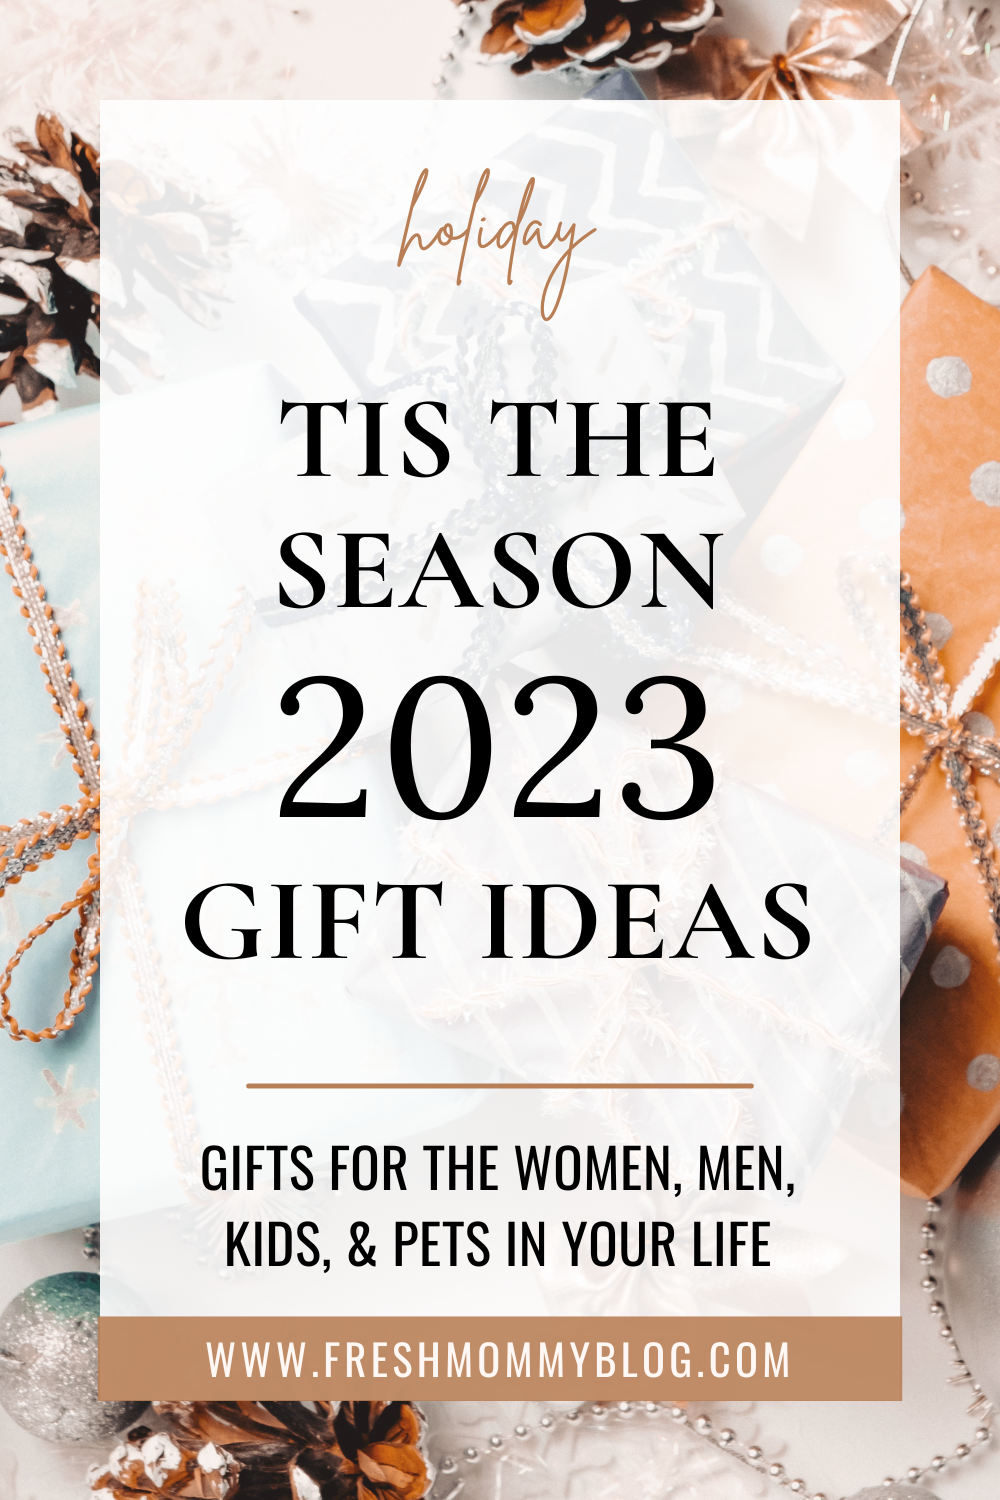 Tis the Season! We've created some epic 2023 Holiday Gift Guides!